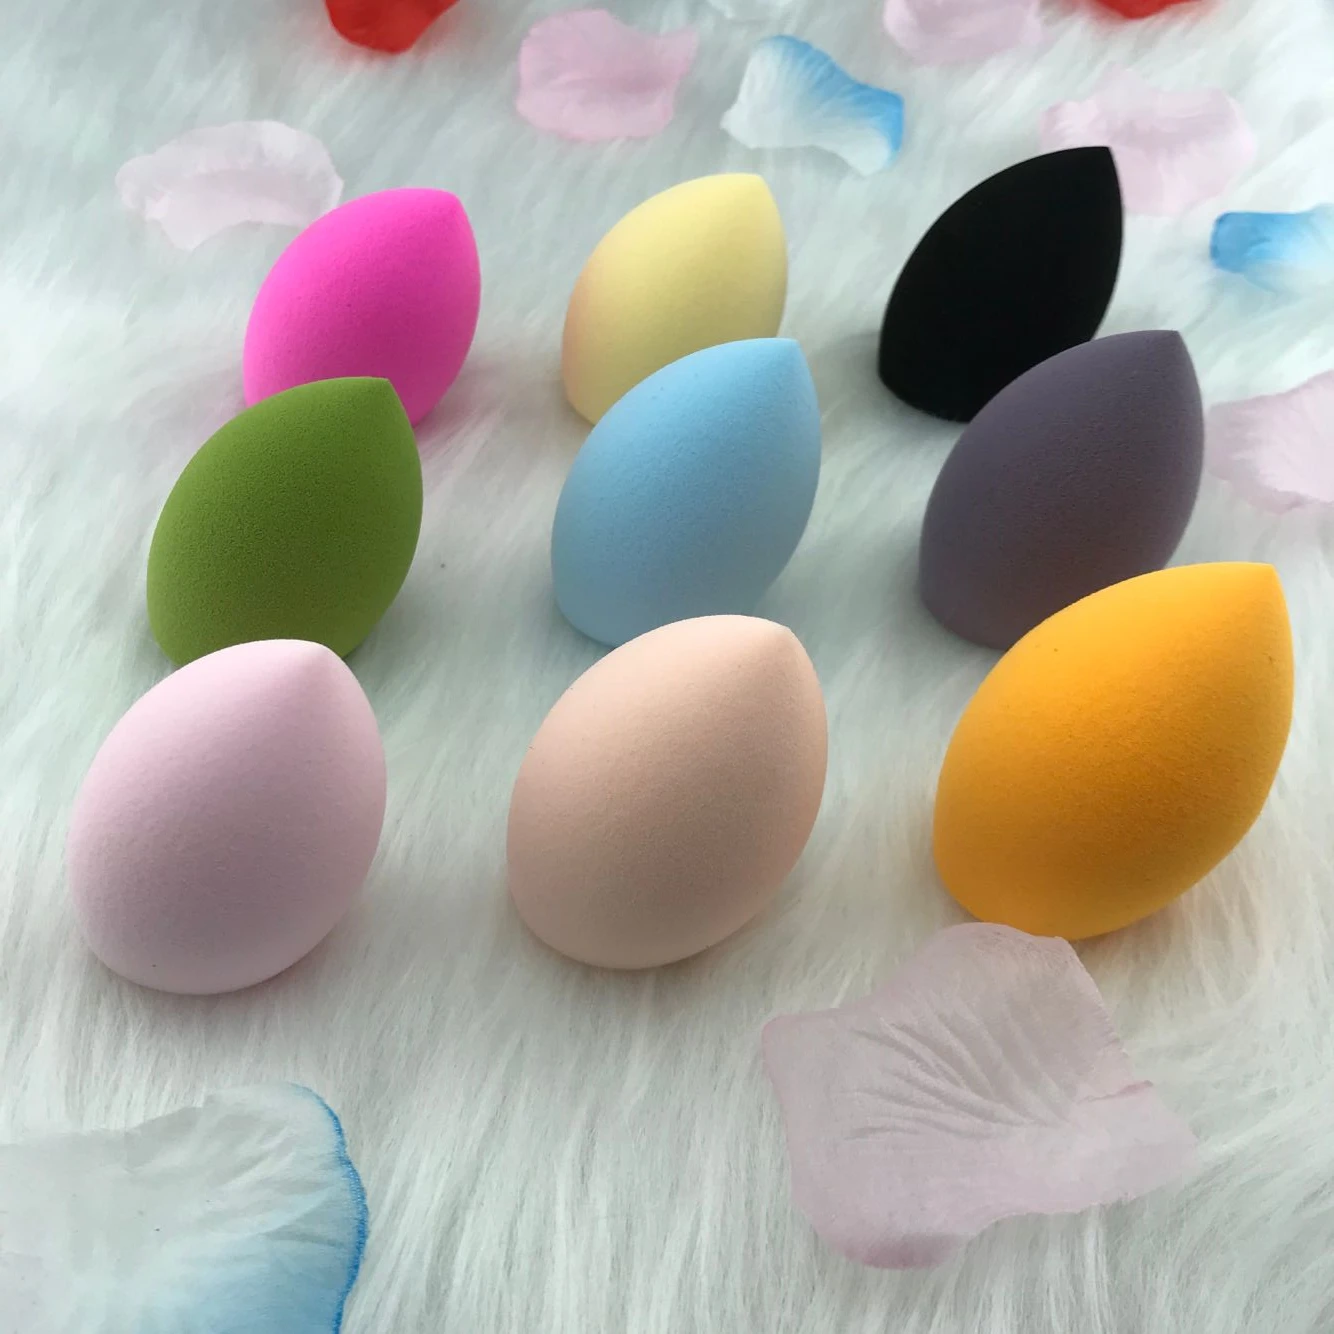 2021 hot selling amazon products of makeup sponge with private label makeup sponge cosmetic